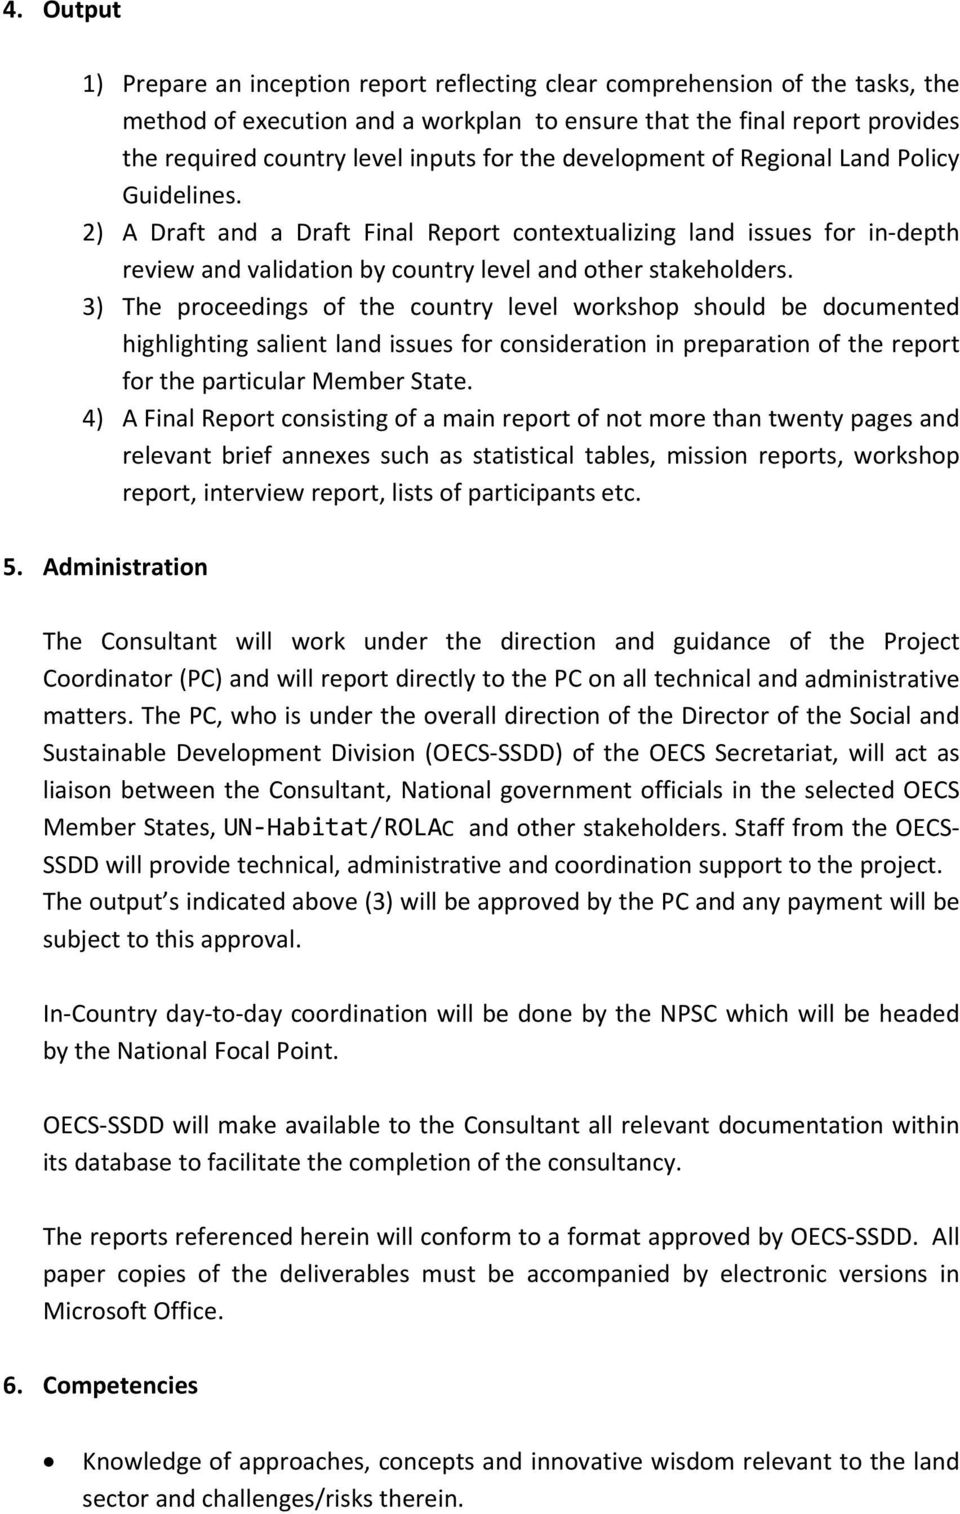 3) The proceedings of the country level workshop should be documented highlighting salient land issues for consideration in preparation of the report for the particular Member State.